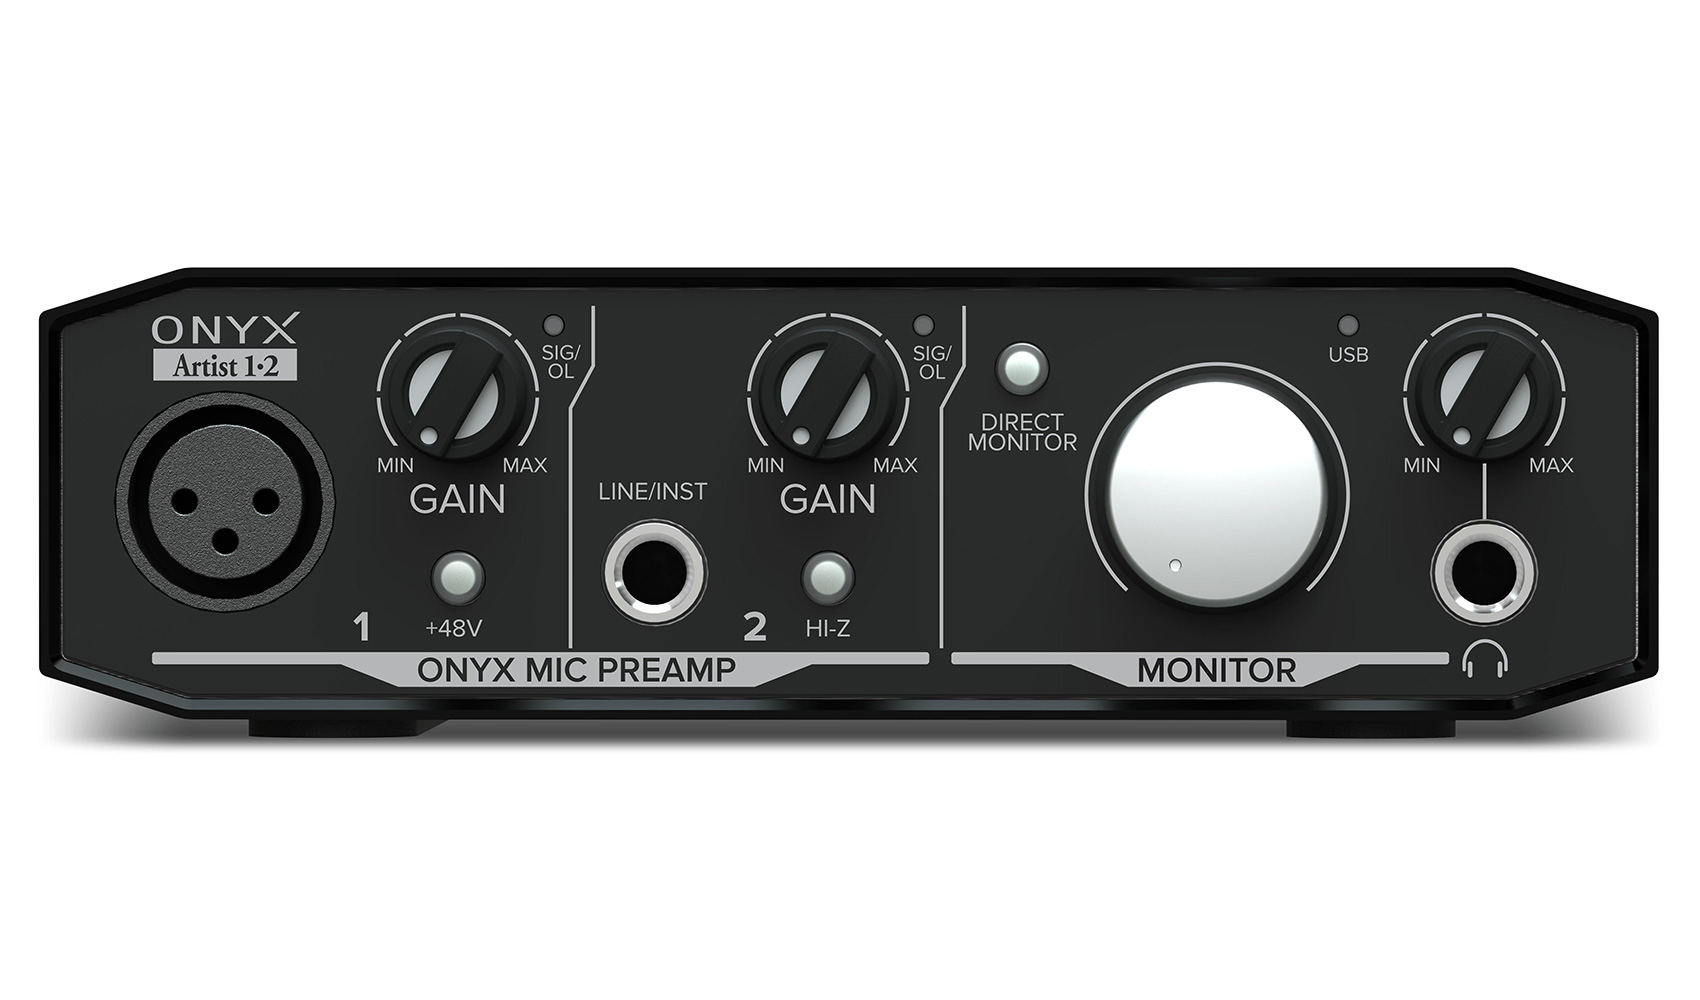 Mackie Onyx Artist 1.2 2x2 USB Audio Recording Studio Interface and Stand - image 2 of 11